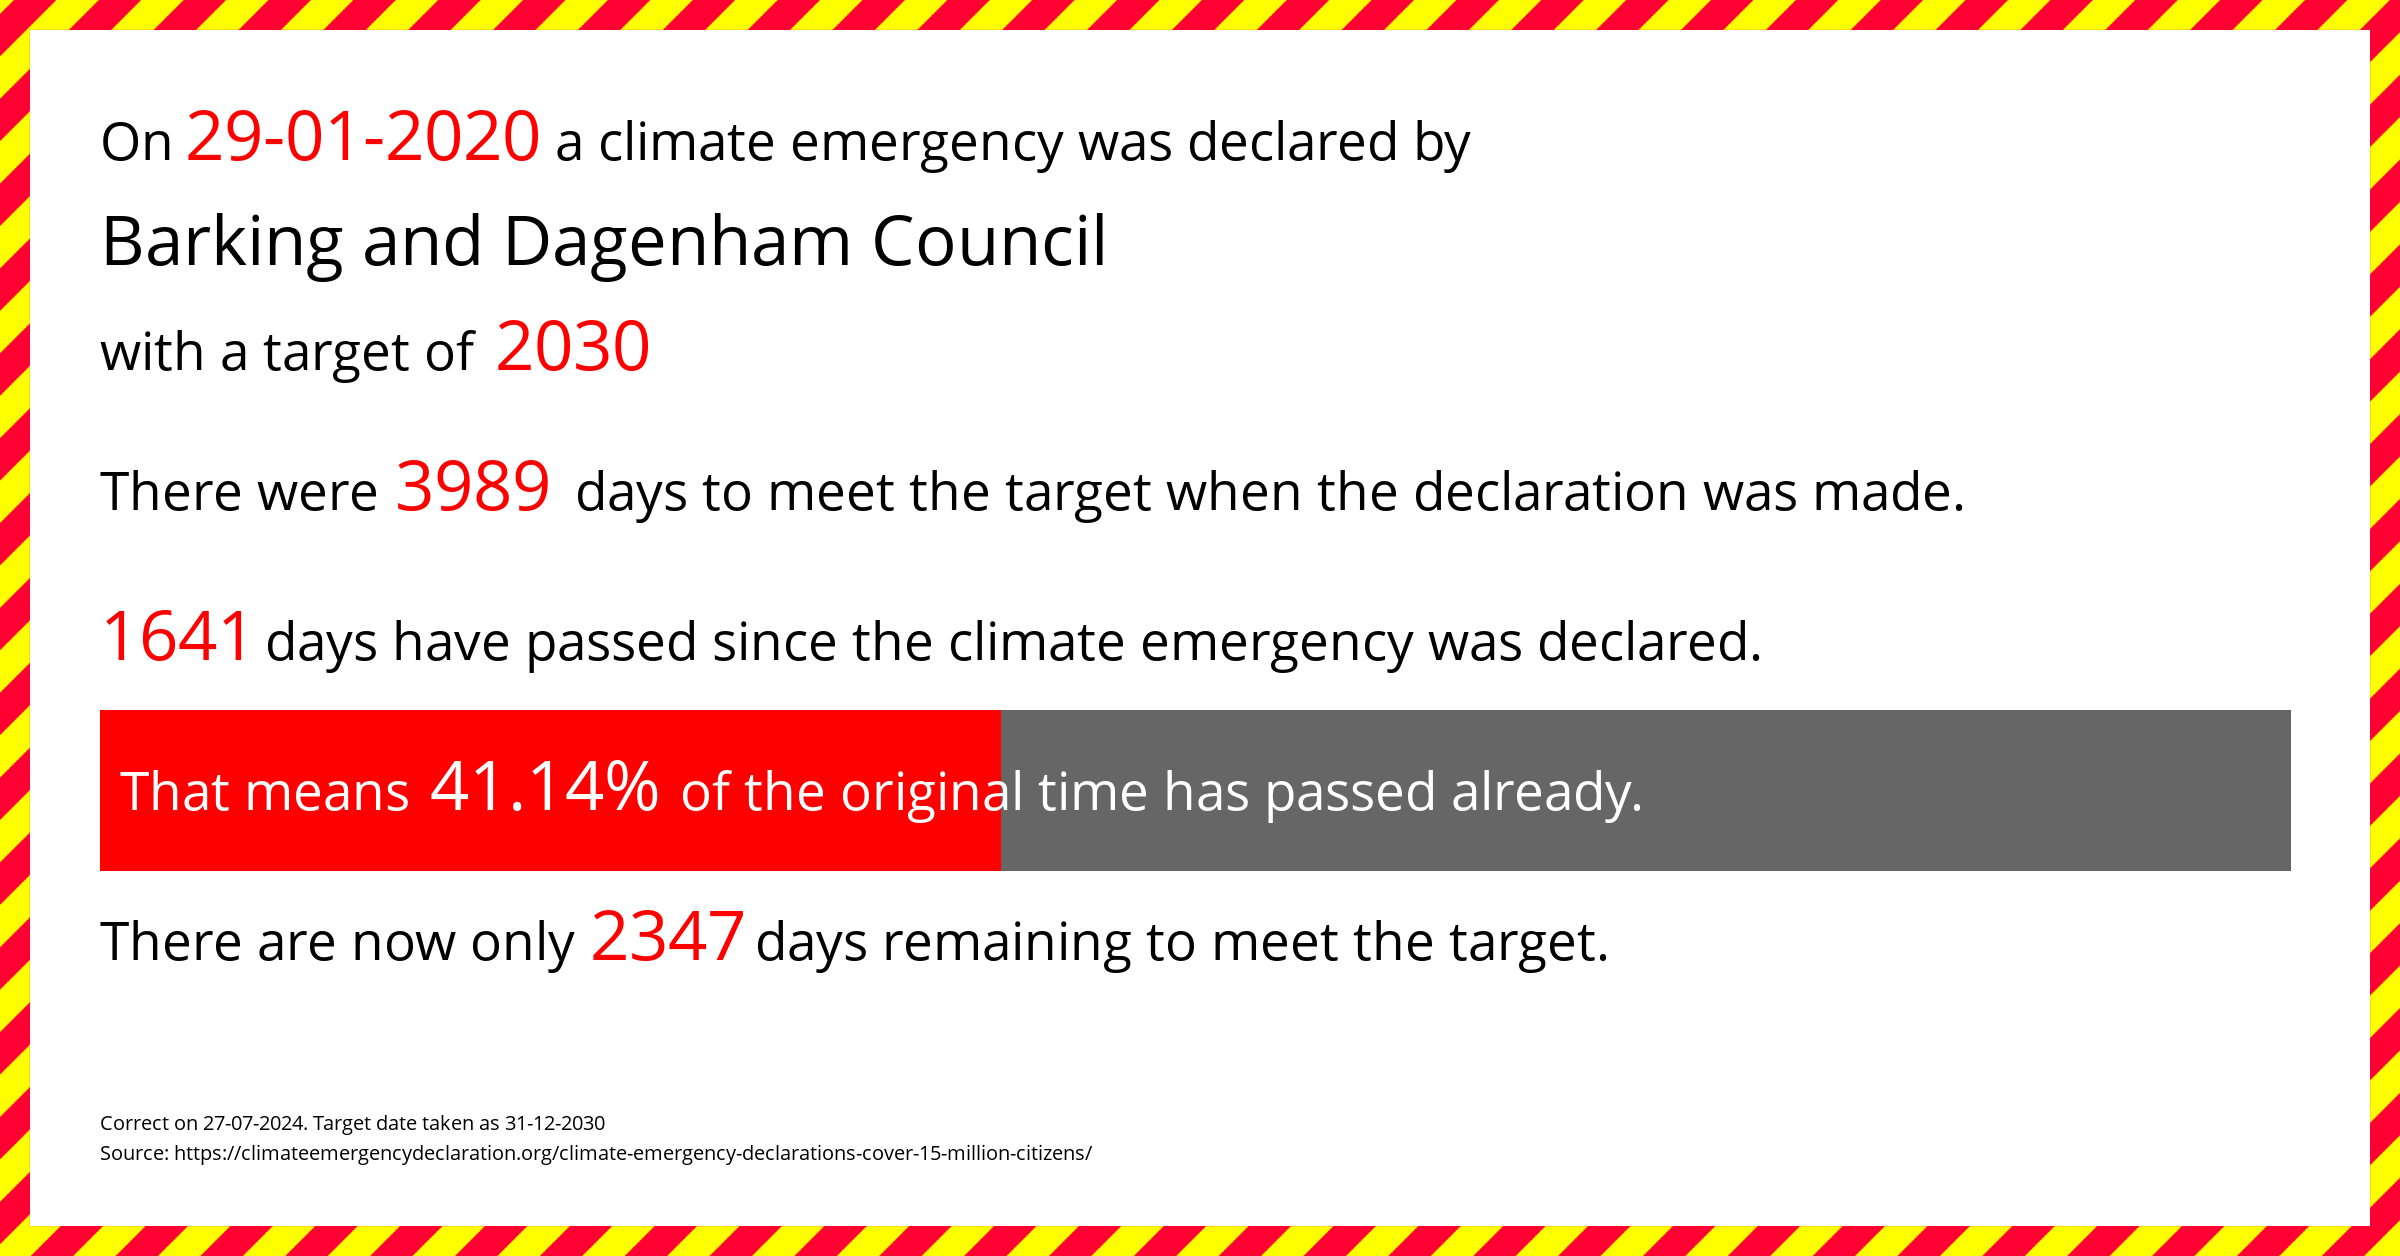 Barking and Dagenham Council declared a Climate emergency on Wednesday 29th January 2020, with a target of 2030.